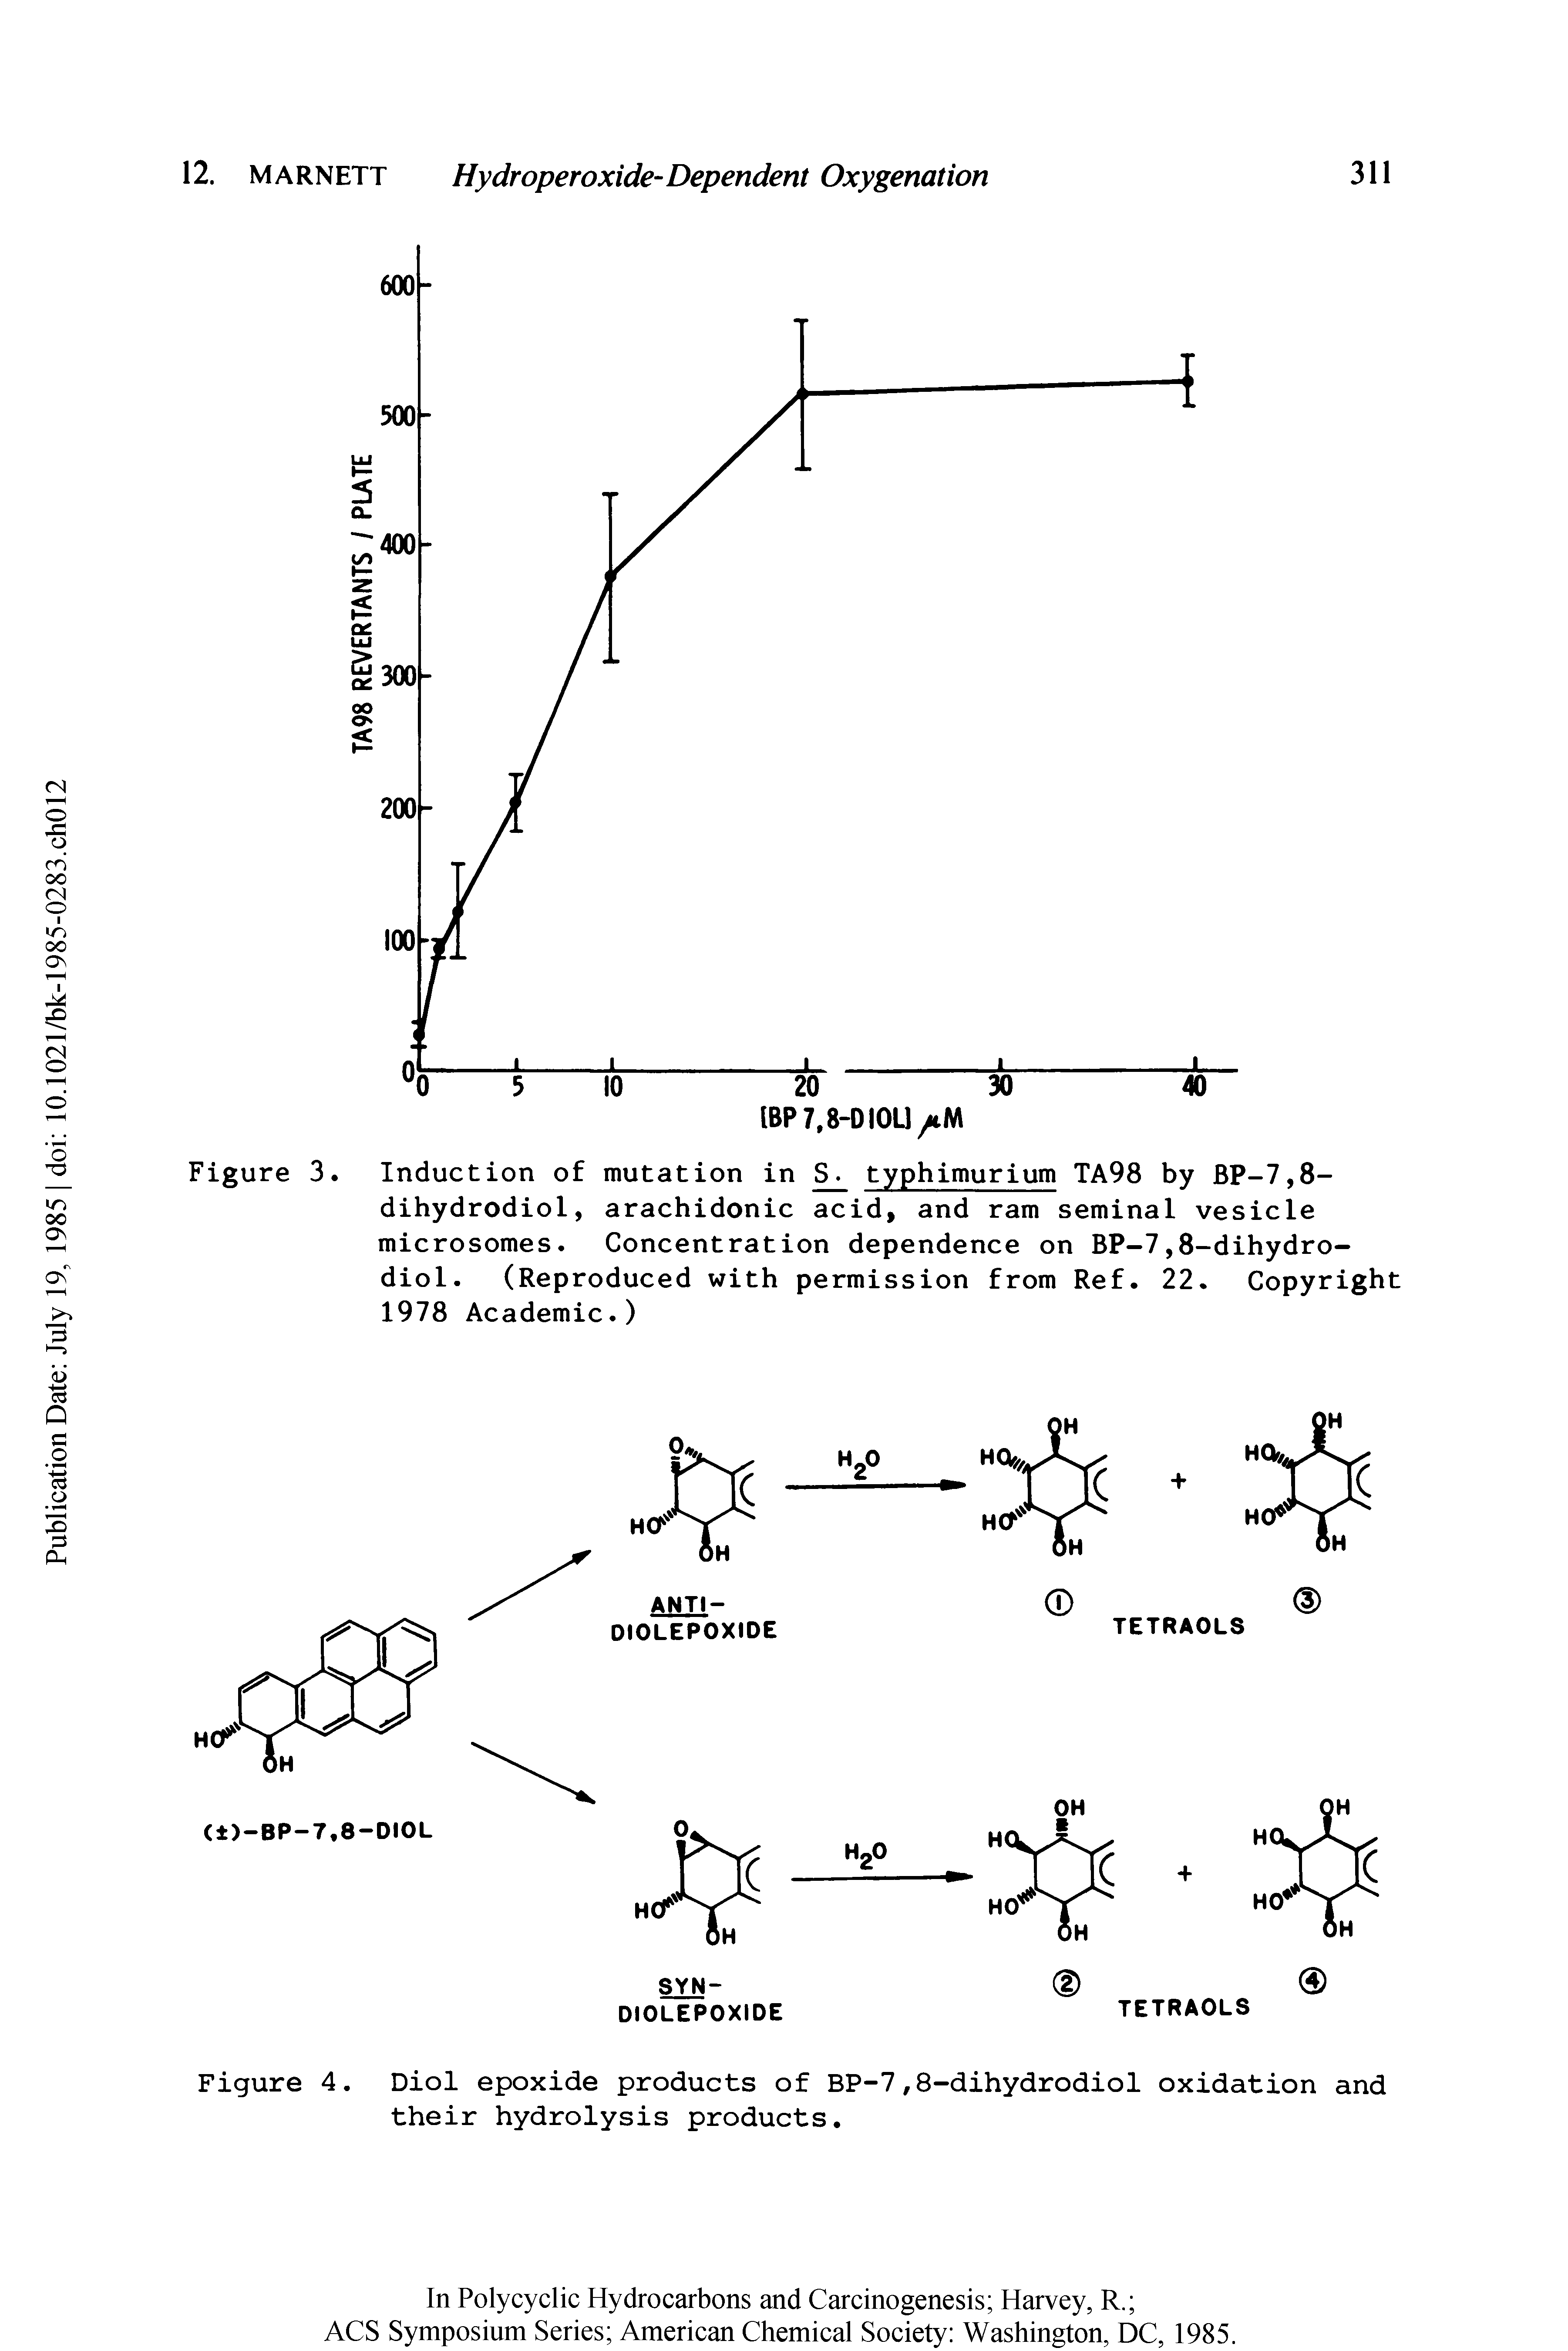 Figure 4. Diol epoxide products of BP-7,8-dihydrodiol oxidation and their hydrolysis products.